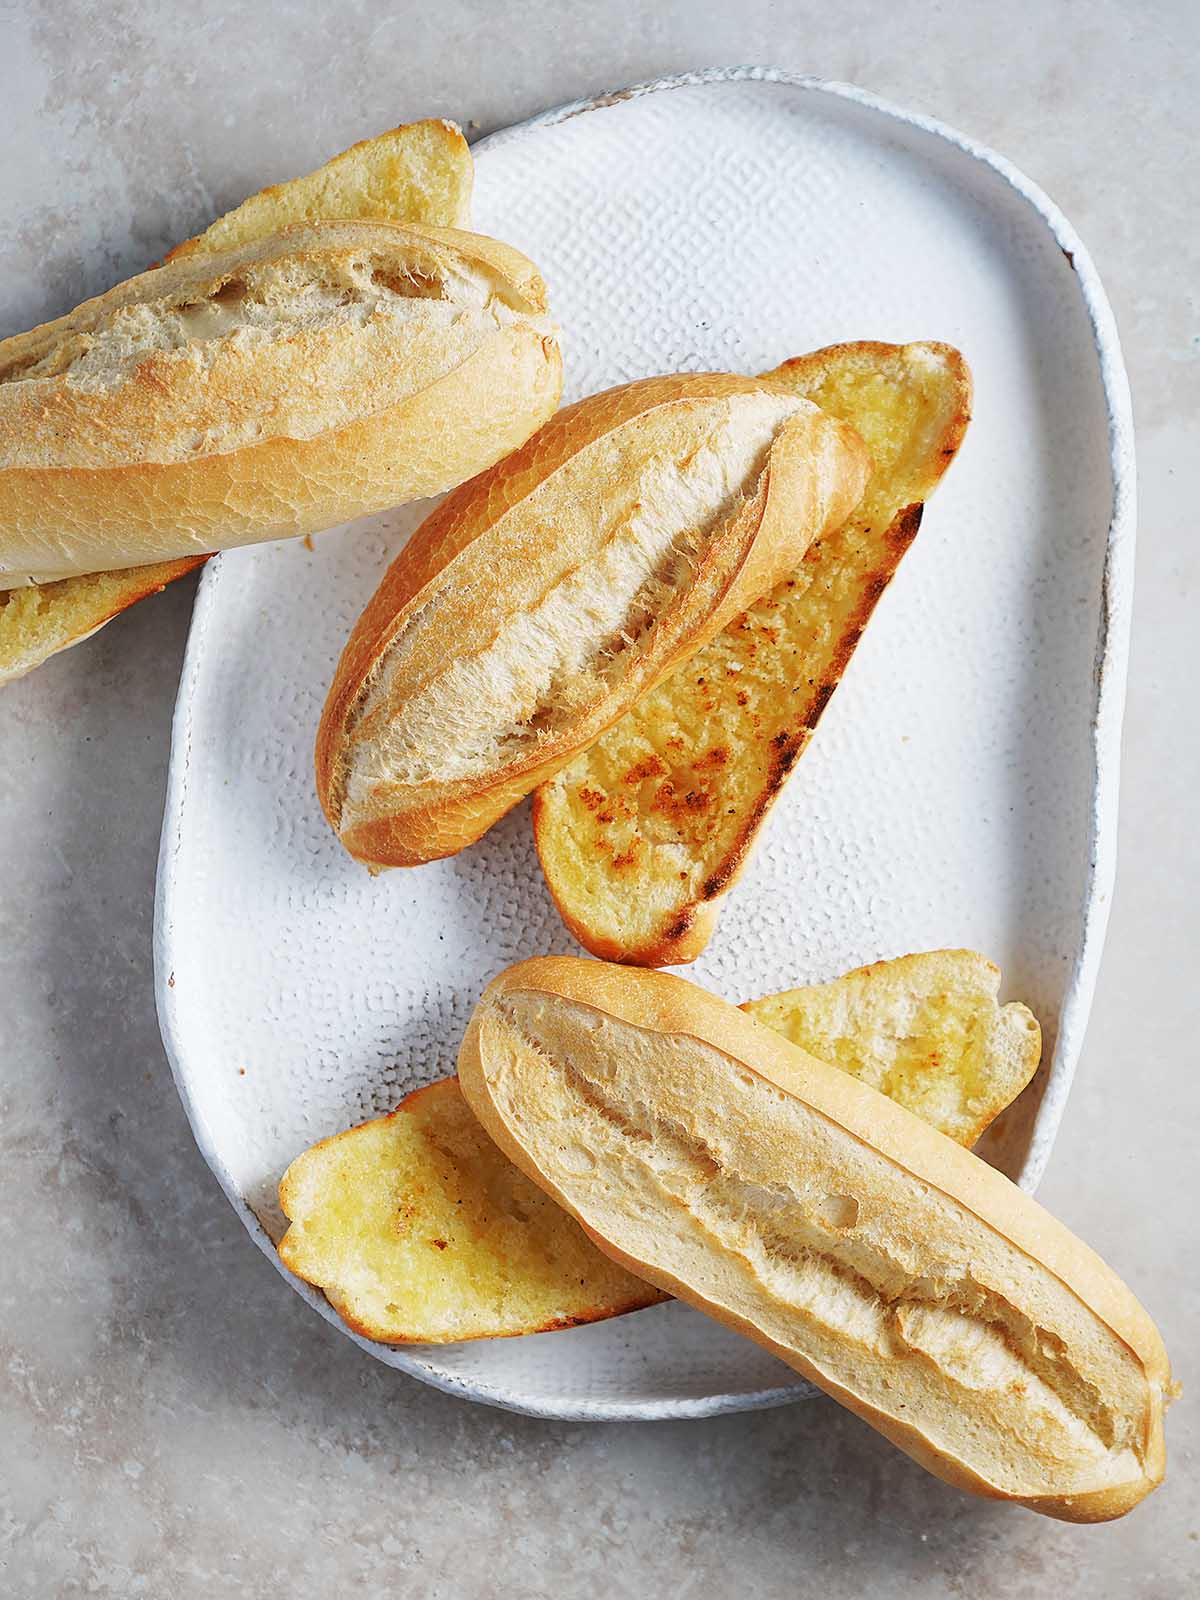 Bolillo bread sliced in half and toasted with butter.